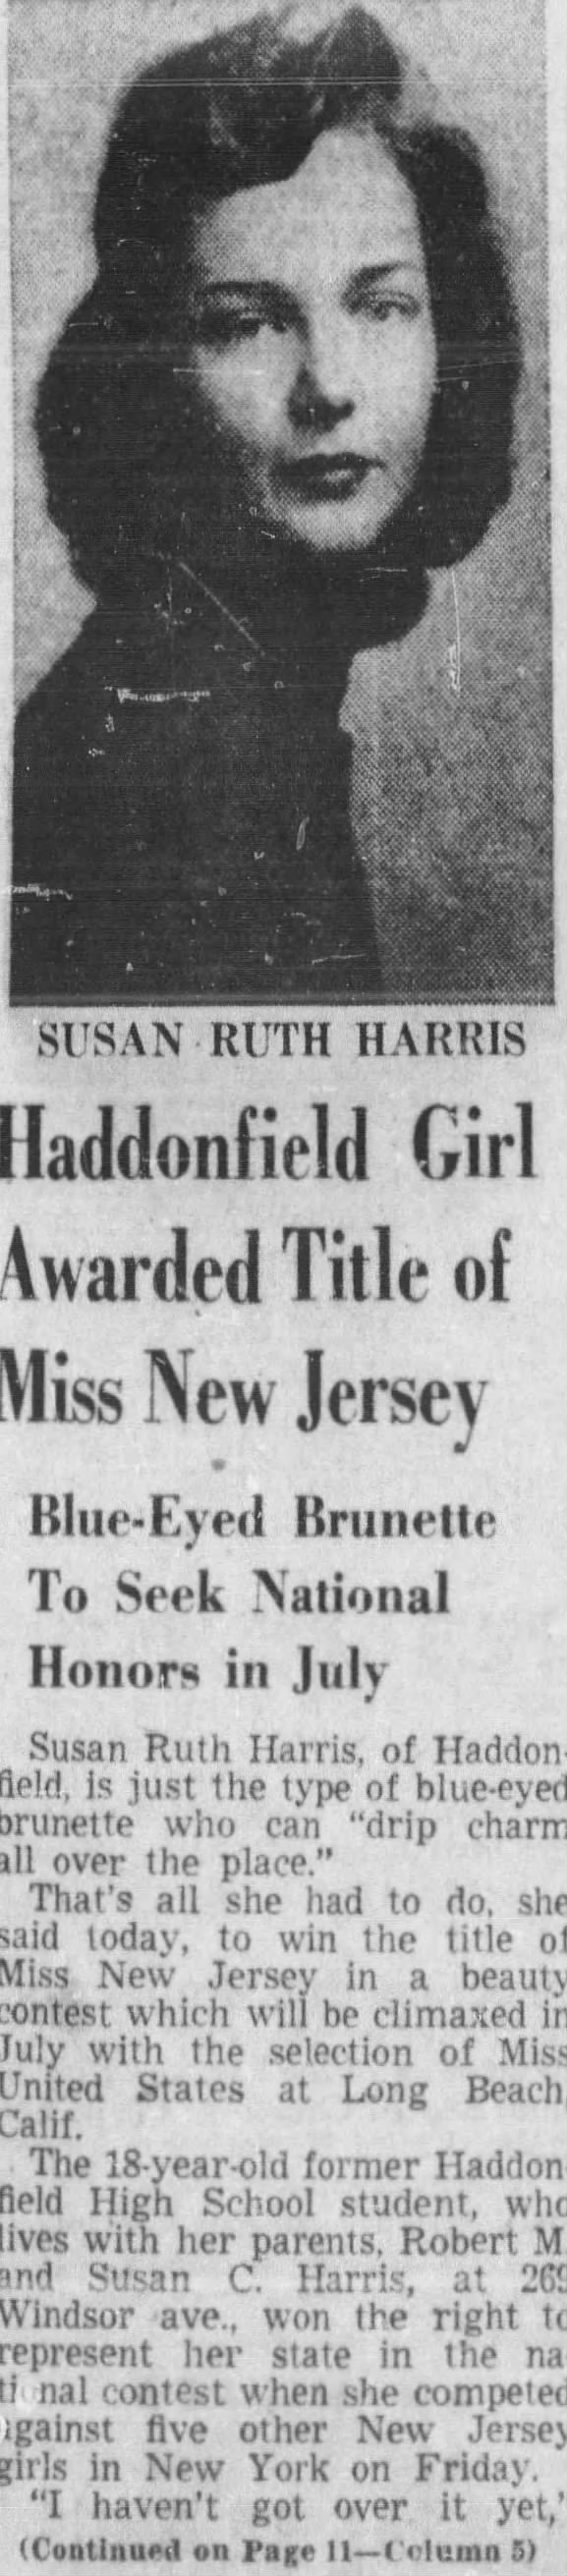 May 30, 1953 - Haddonfield Girl Awarded Title of Miss New Jersey